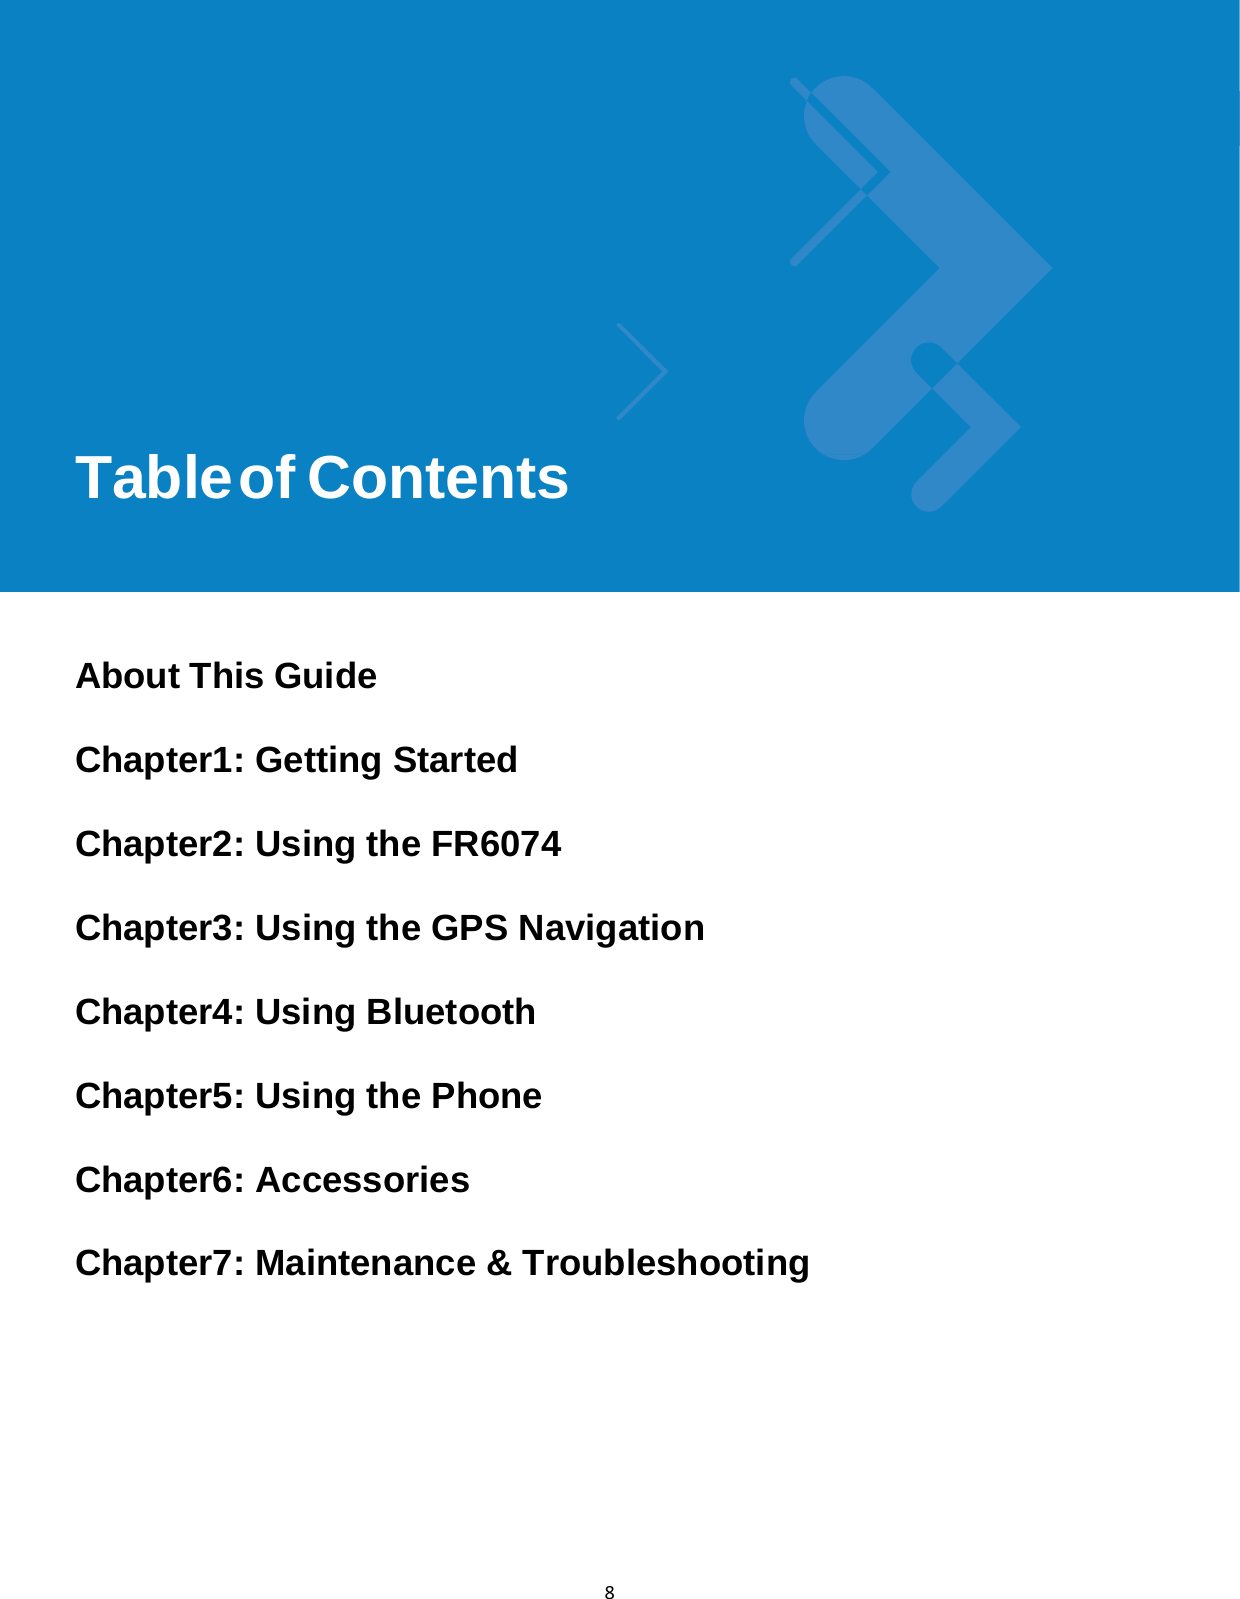 Table of Contentsix 8               Table of Contents        About This Guide  Chapter1: Getting Started  Chapter2: Using the FR6074  Chapter3: Using the GPS Navigation  Chapter4: Using Bluetooth  Chapter5: Using the Phone  Chapter6: Accessories  Chapter7: Maintenance &amp; Troubleshooting      